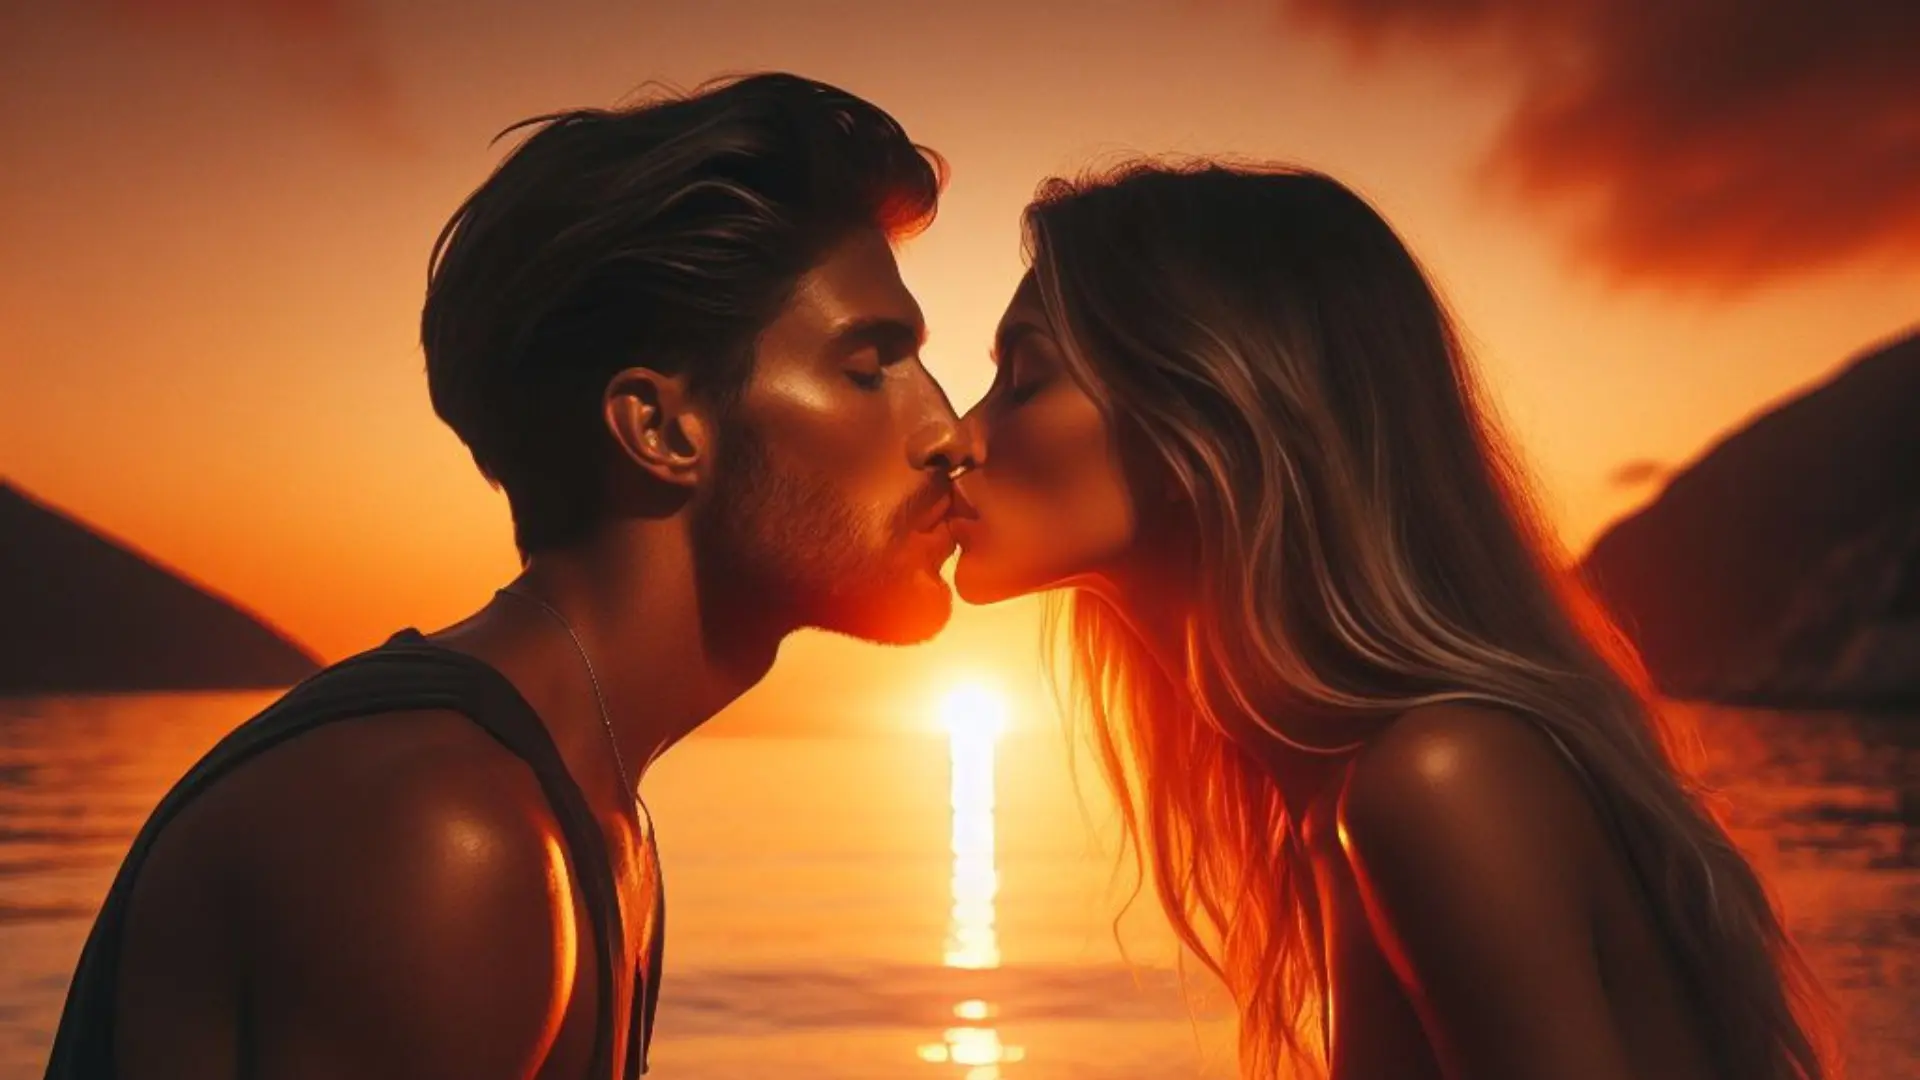 Captivating ocean sunset frames a 30-year-old guy and a 25-year-old girl sharing a meaningful French kiss by candlelight on a secluded beach. What does it mean when a guy French kisses you?